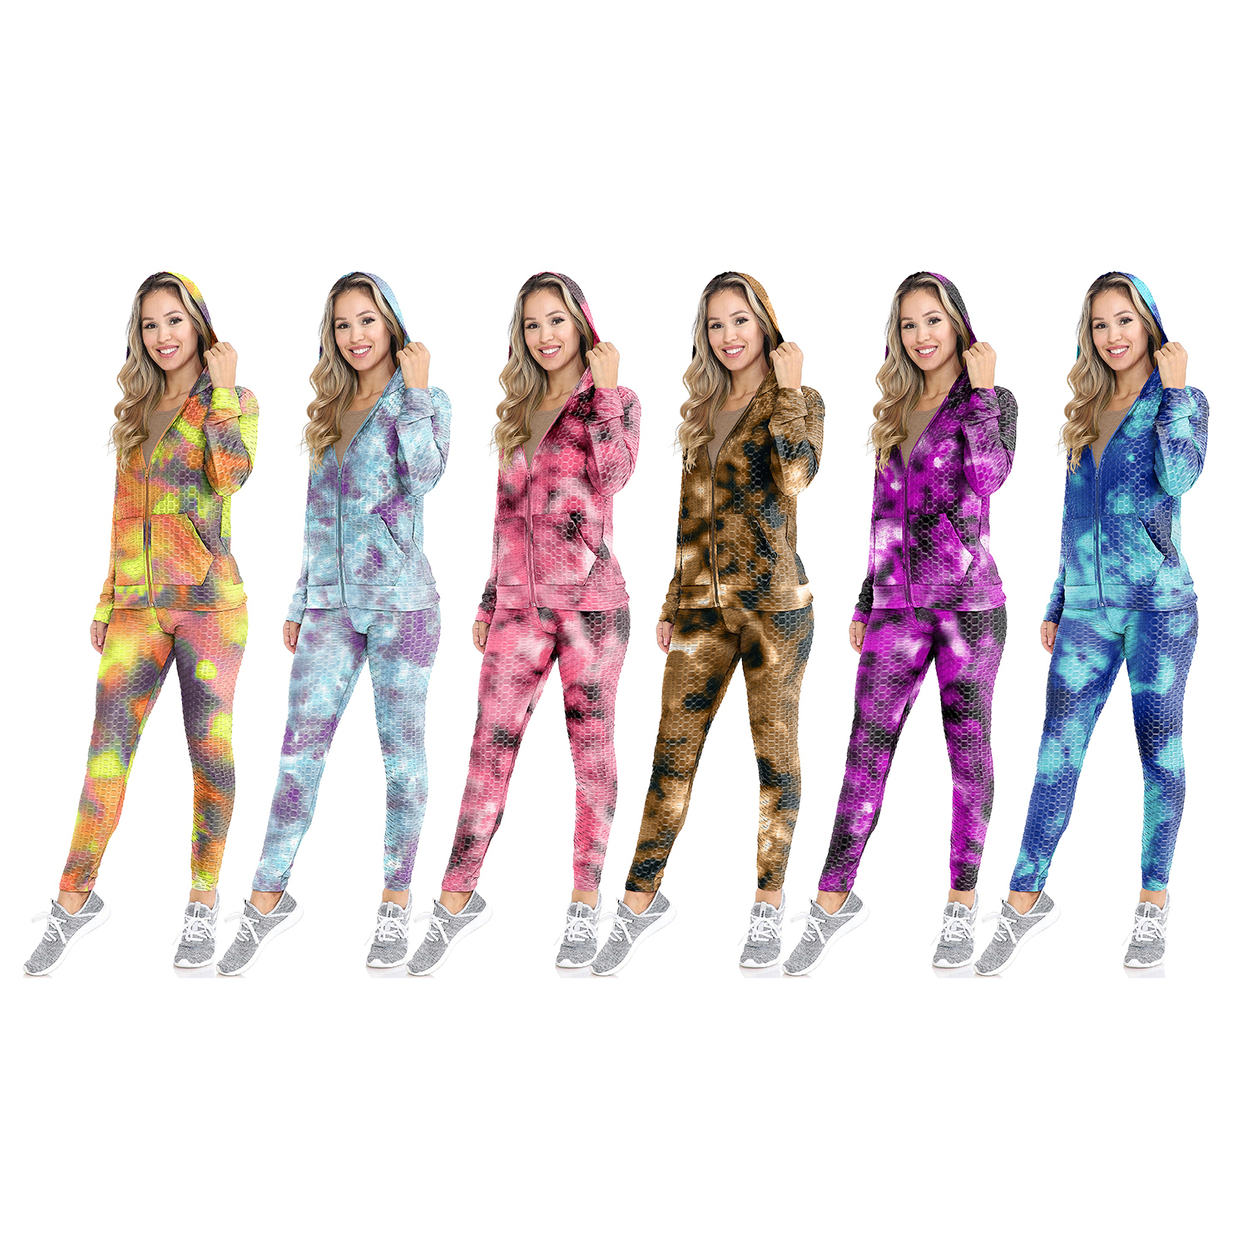 2-Piece: Women's Athletic Anti-Cellulite Textured Tie Dye Body Contour Yoga Track Suit W/ Hood - Large, Solid